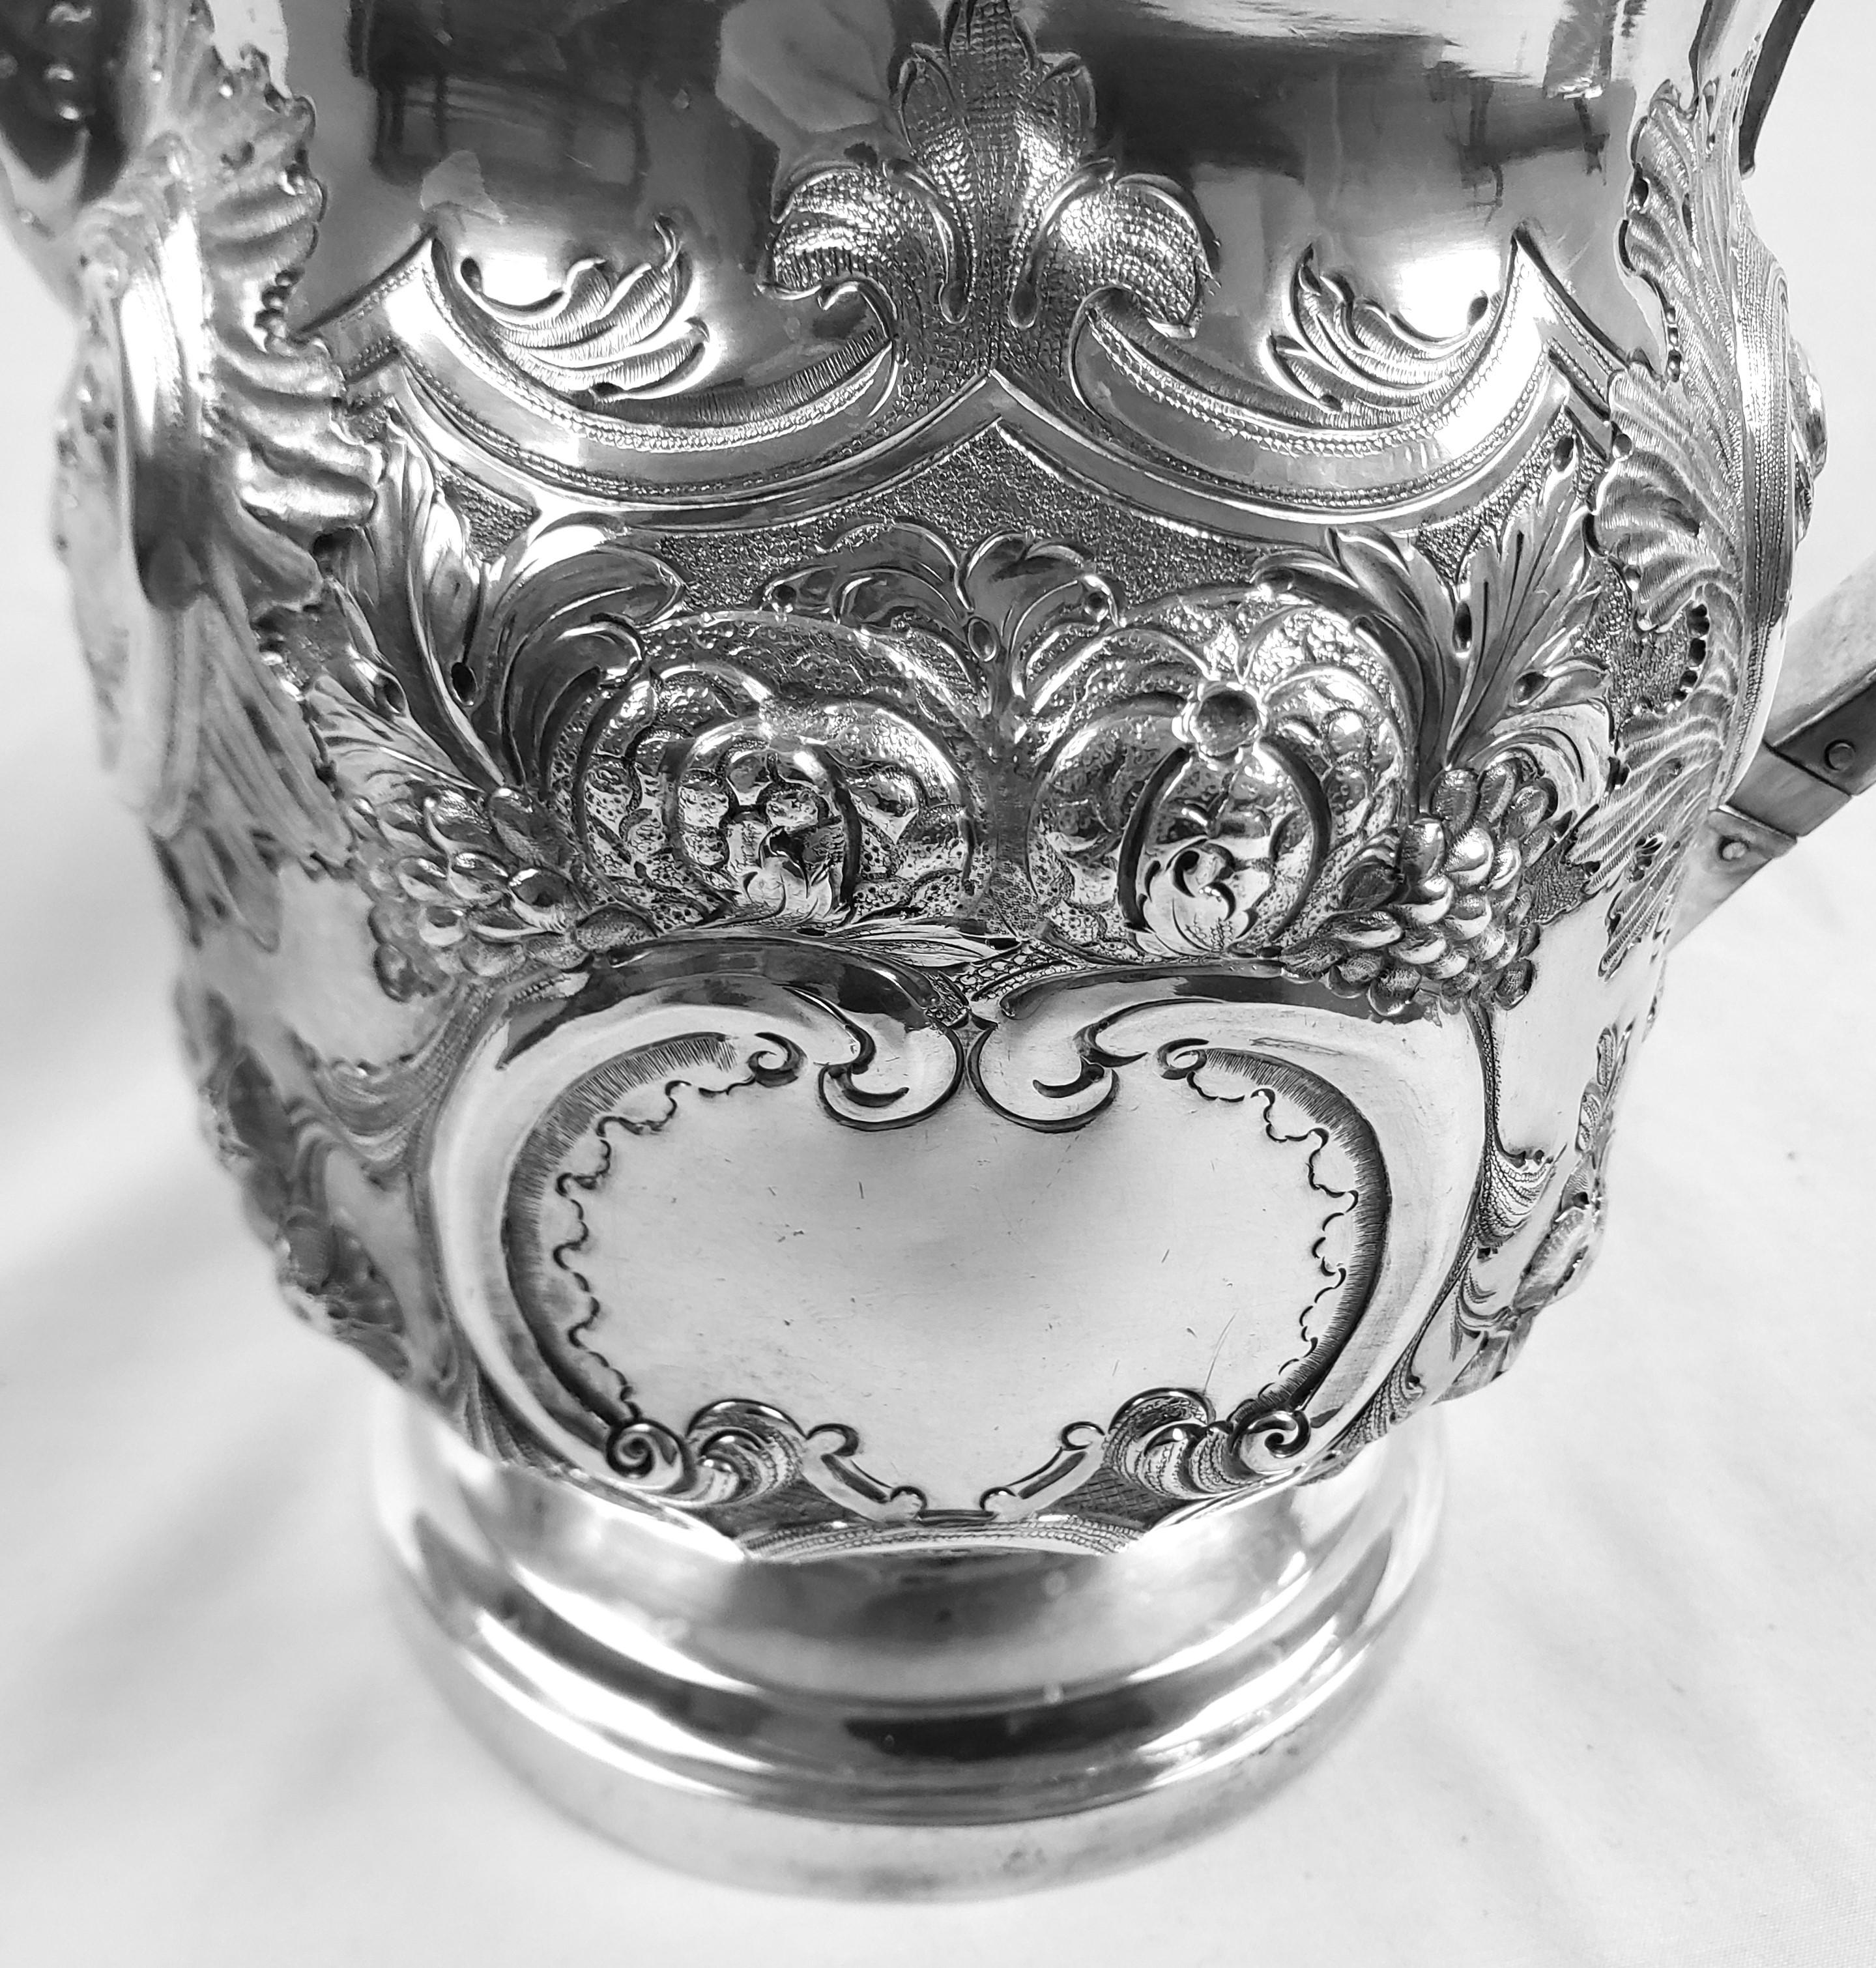 Large Antique Sterling Silver Georgian Teapot with Ornate Repousse Decoration For Sale 6